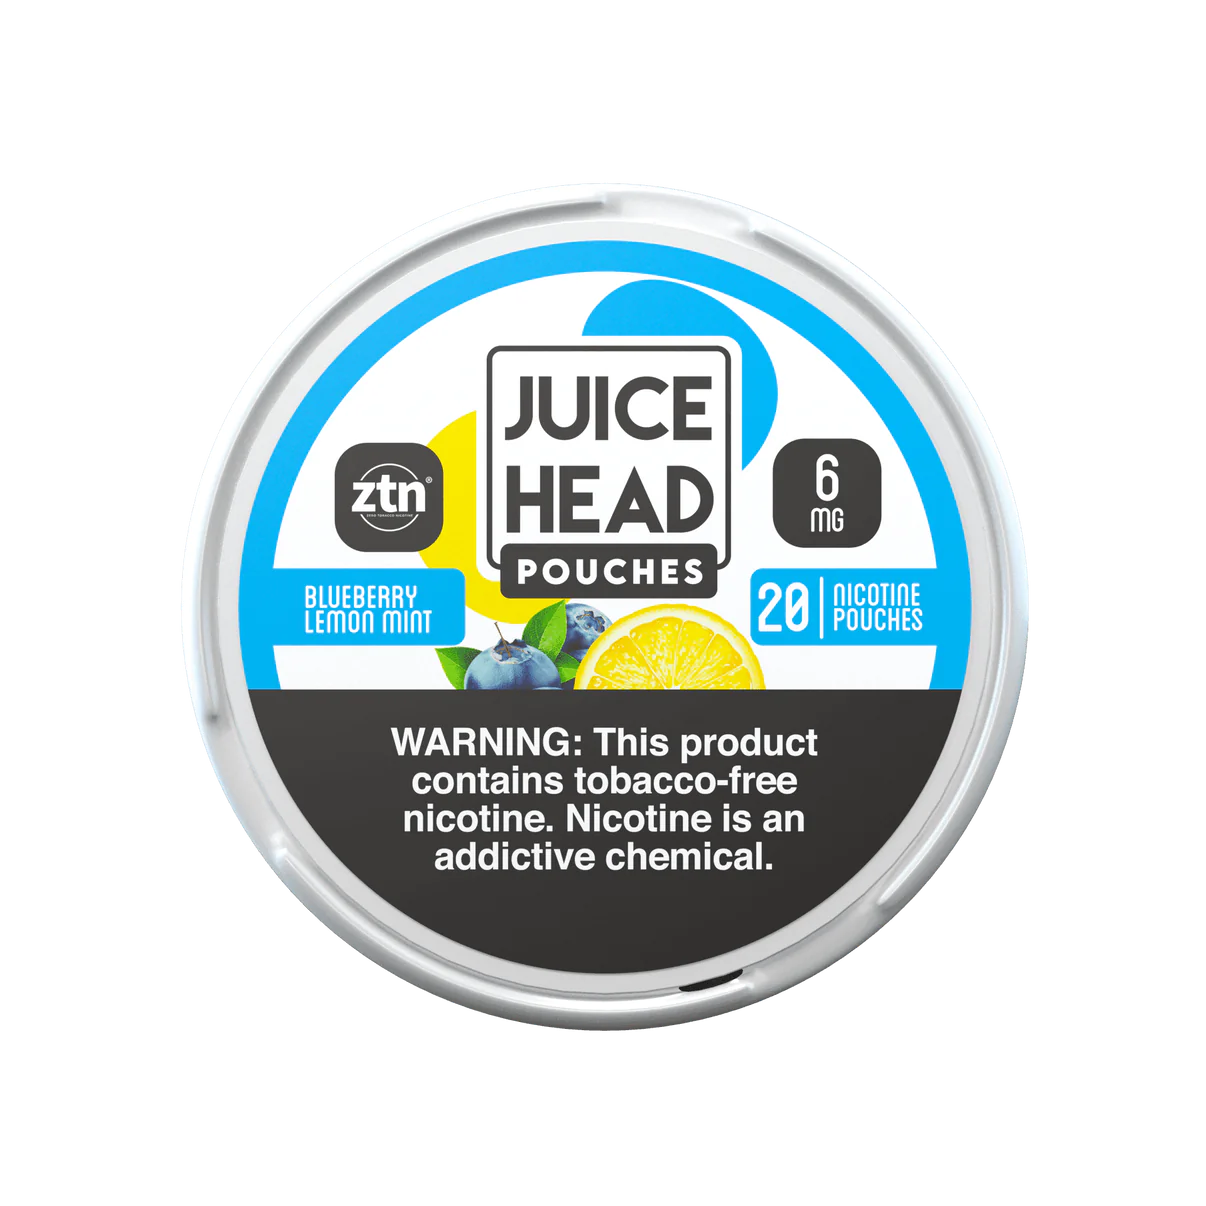 Juice Head Pouches | 20 Pouches | 6mg & 12mg